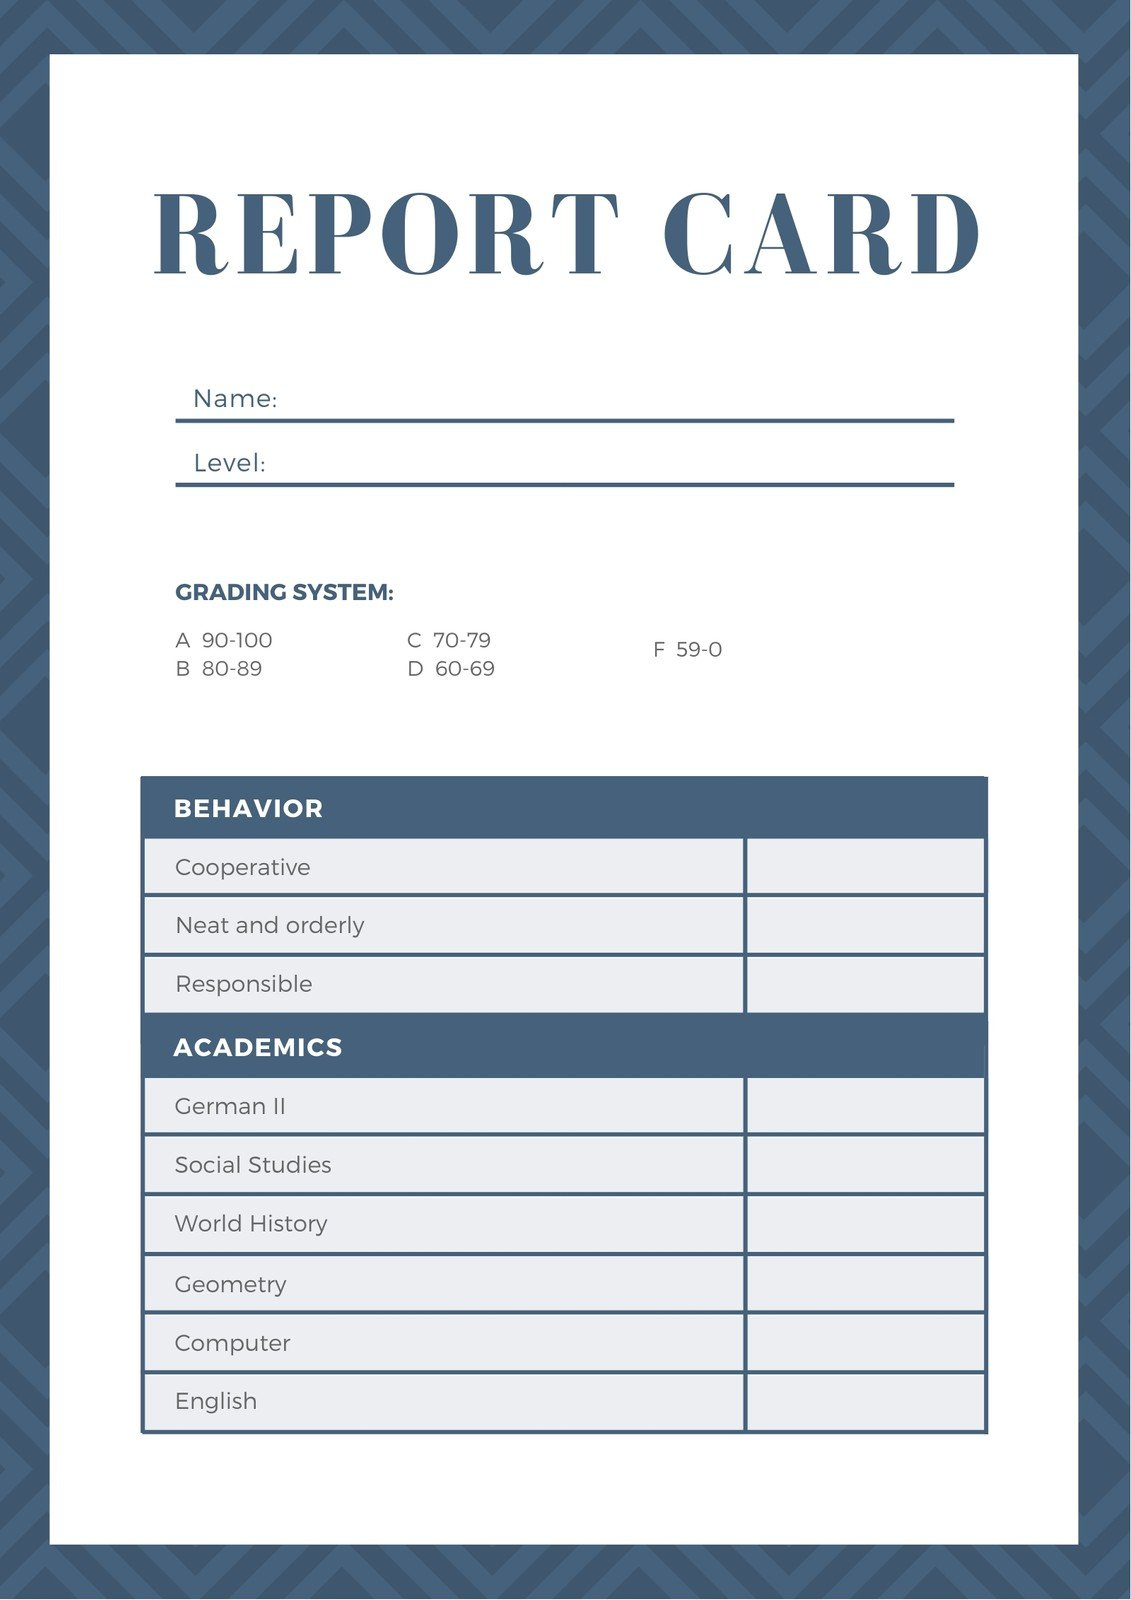 Free, Printable, Customizable Report Card Templates | Canva pertaining to Free Printable Grade Cards